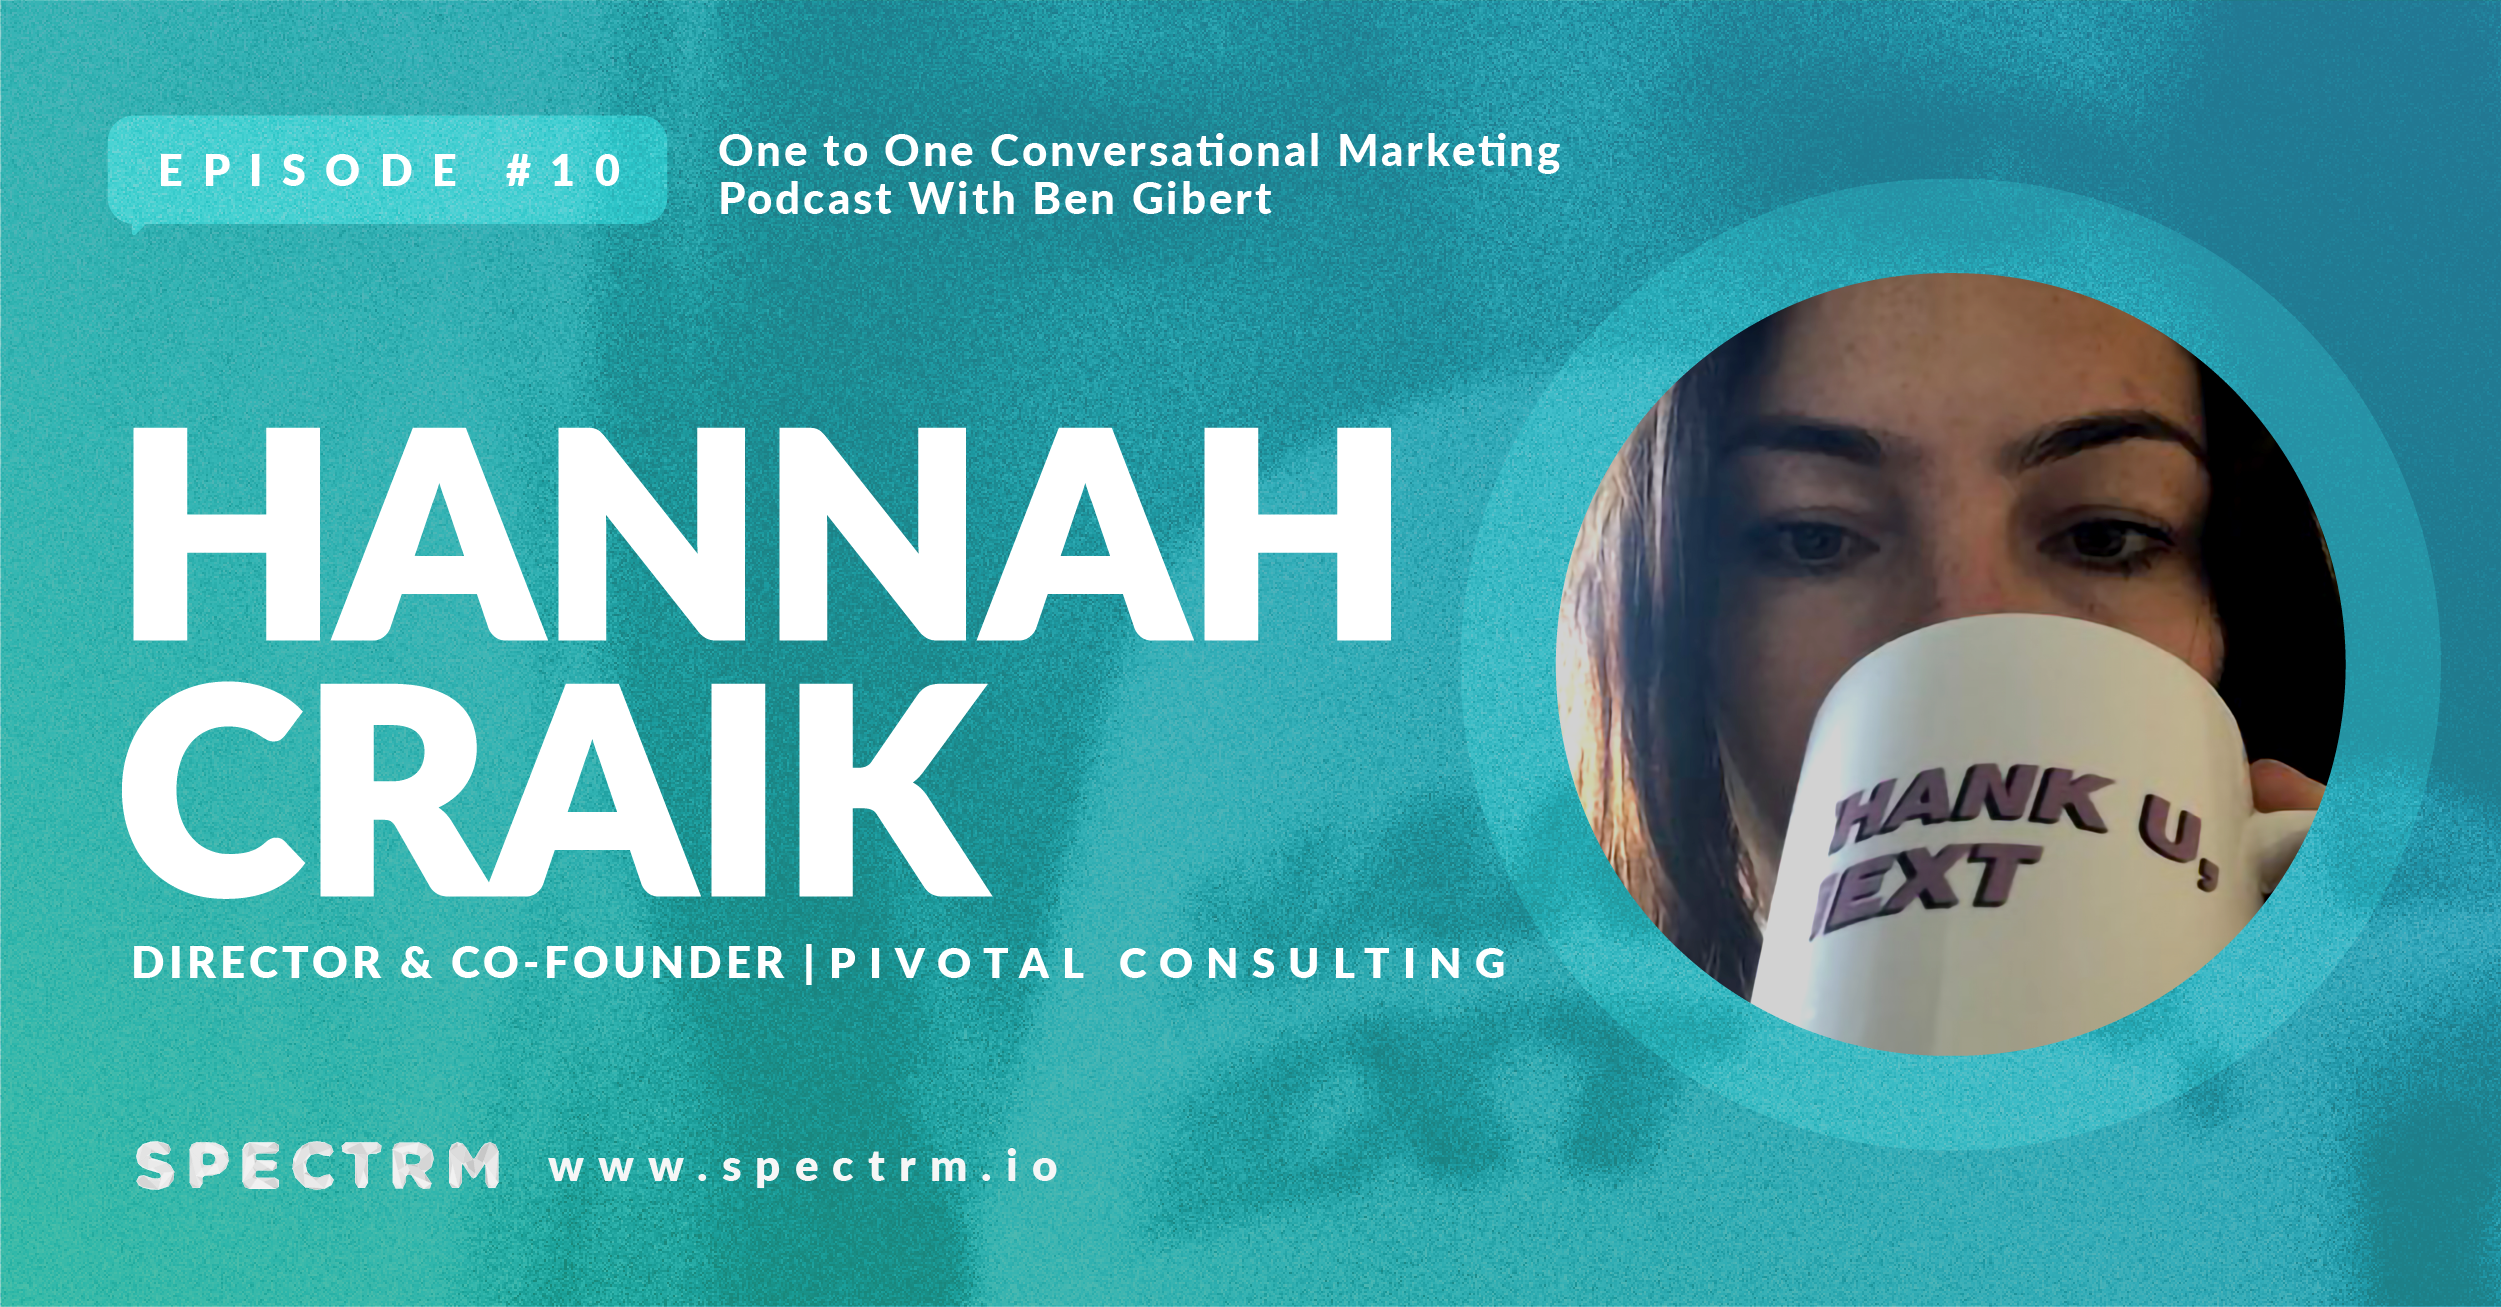 service personalization in marketing podcast with hanna craik